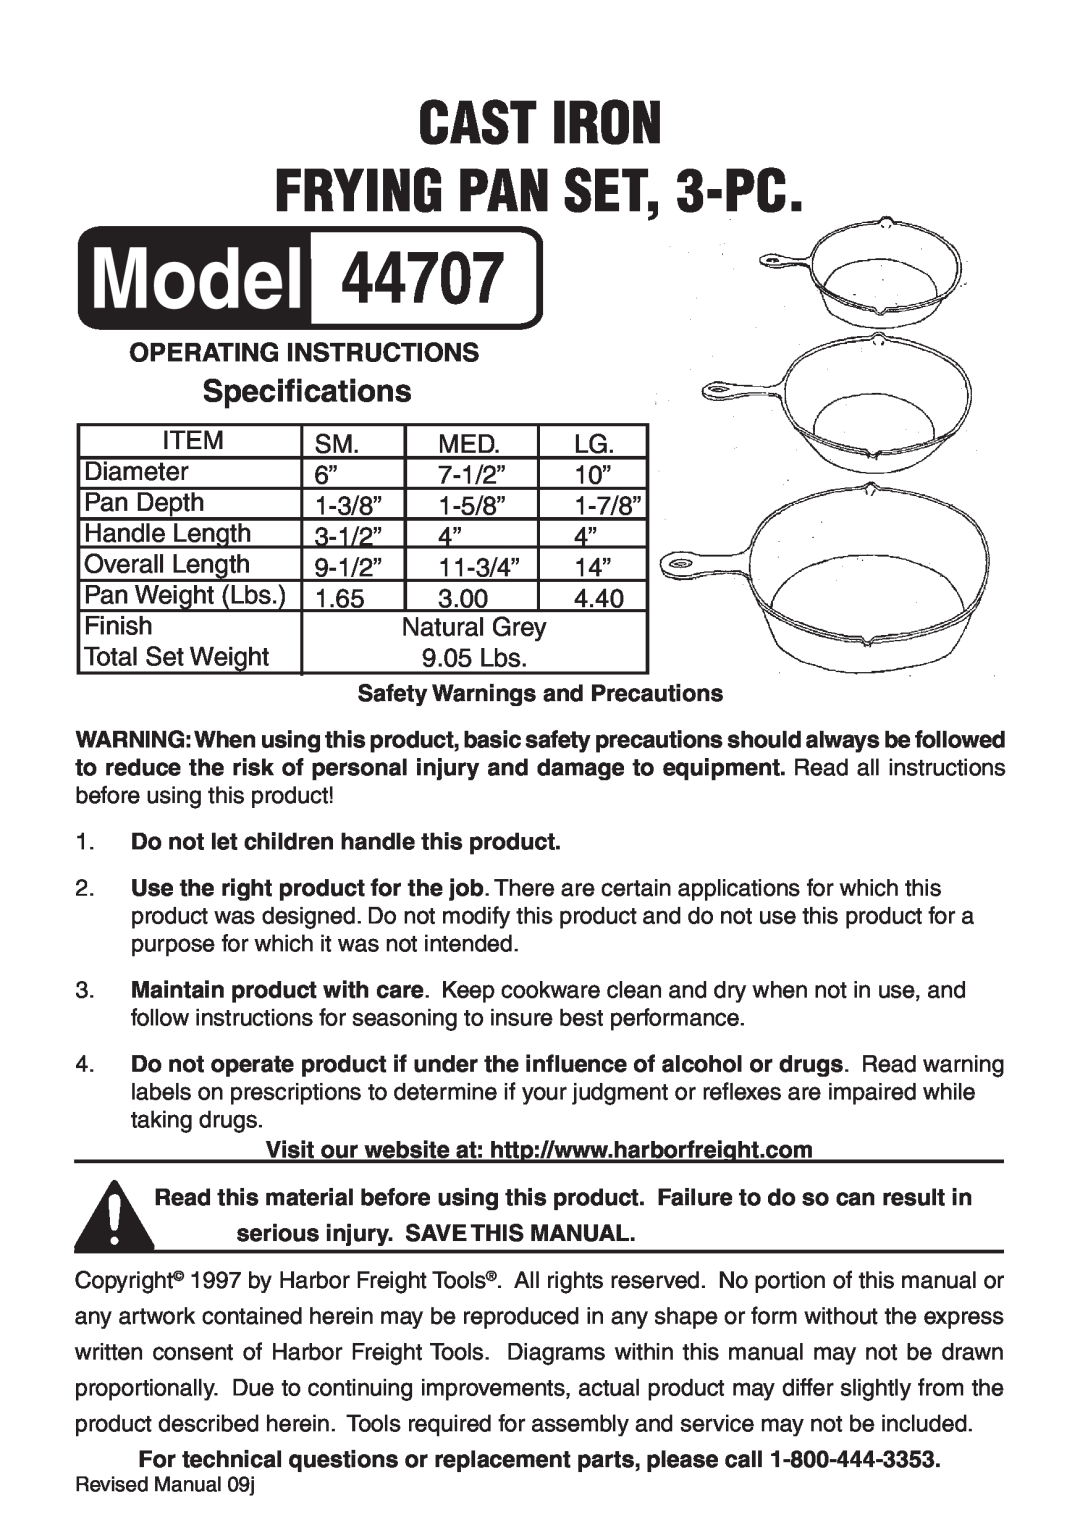 Harbor Freight Tools 44707 specifications Specifications, CAST IRON FRYING PAN SET, 3-PC, Operating Instructions 